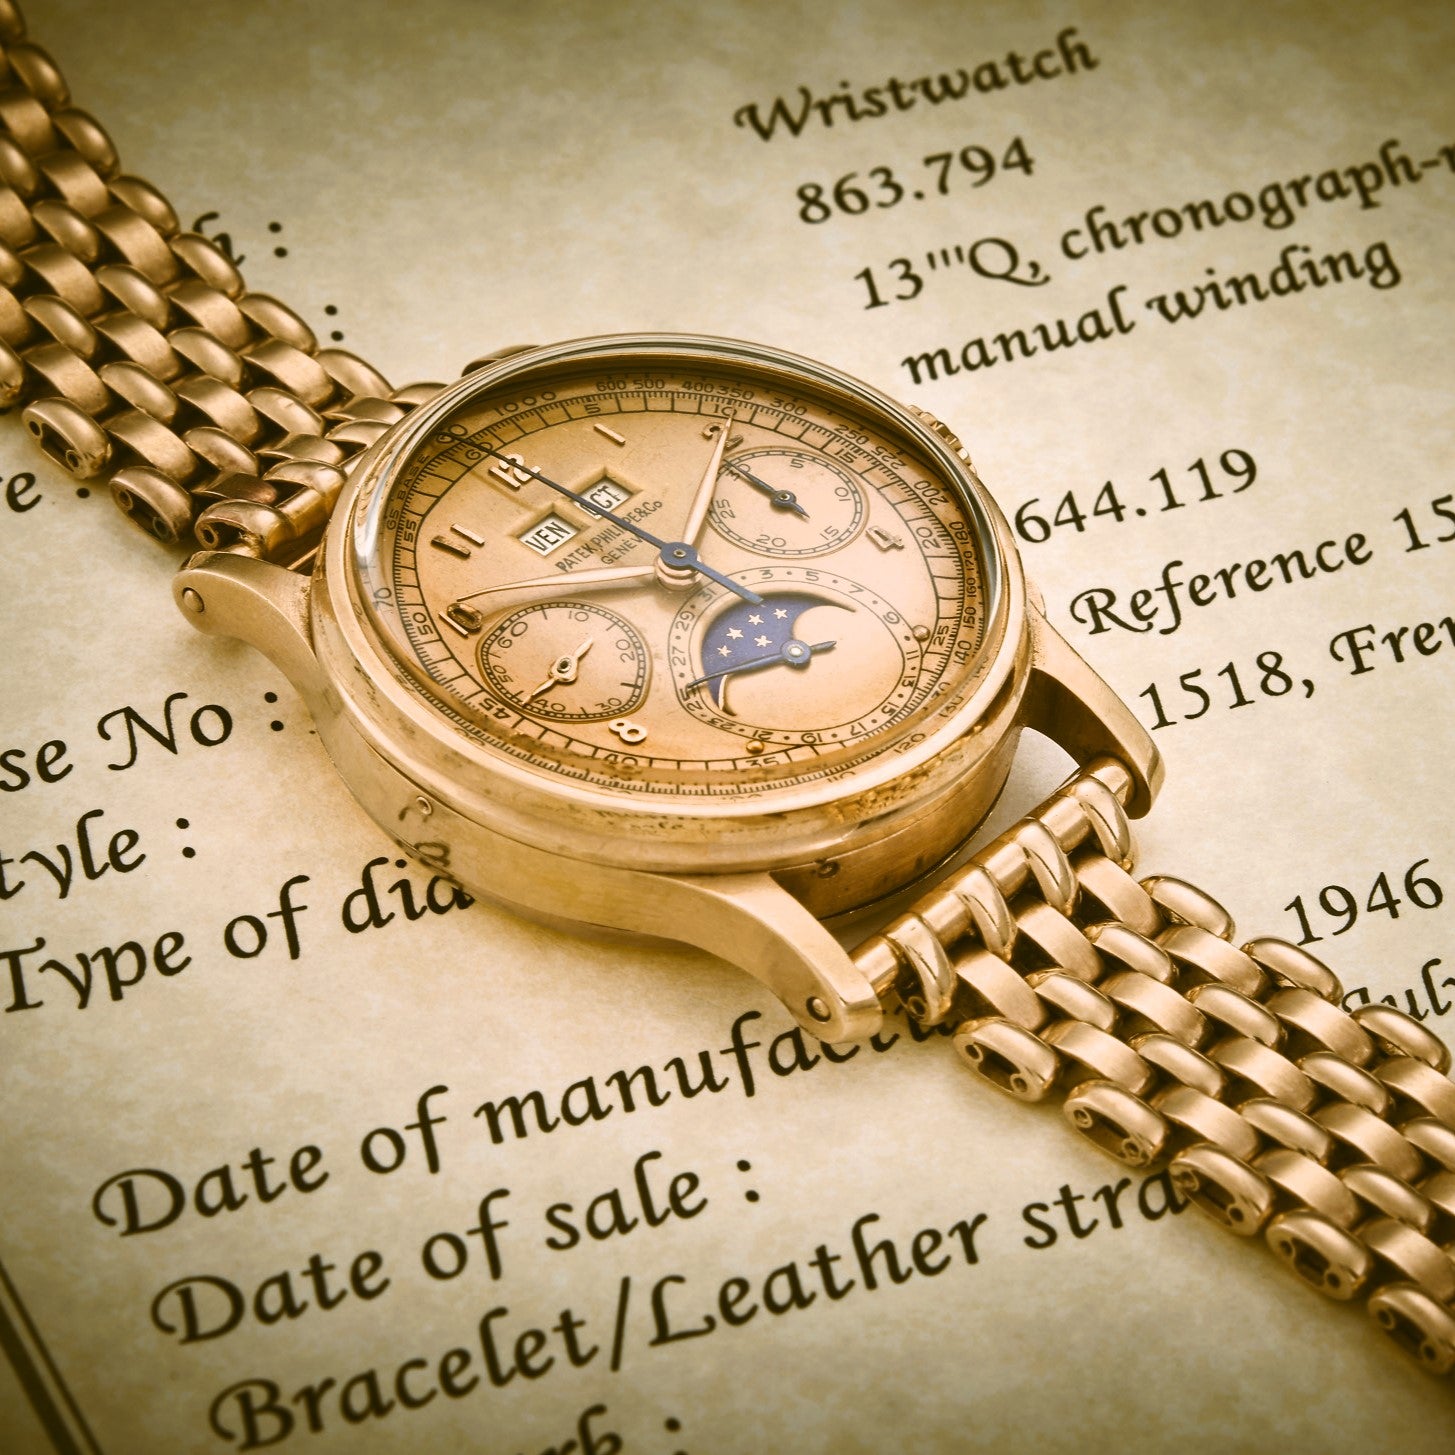 Rolex Day-Date: The Ultimate Gold Watch | The Watch Club by SwissWatchExpo